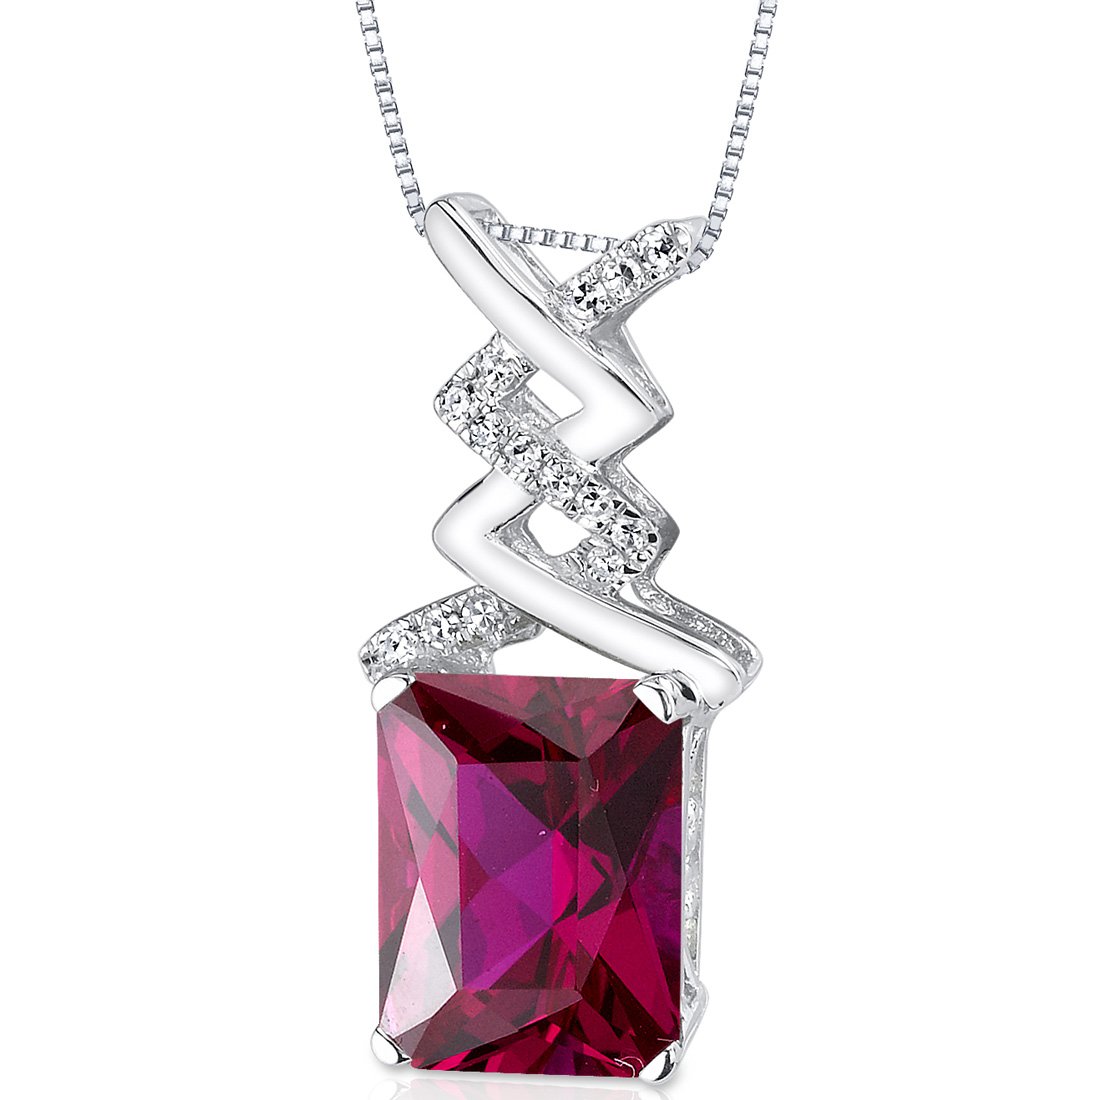 Peora 14K White Gold 4.06 Carats Created Ruby and Genuine Diamond Pendant, AAA Grade Radiant Cut Solitaire